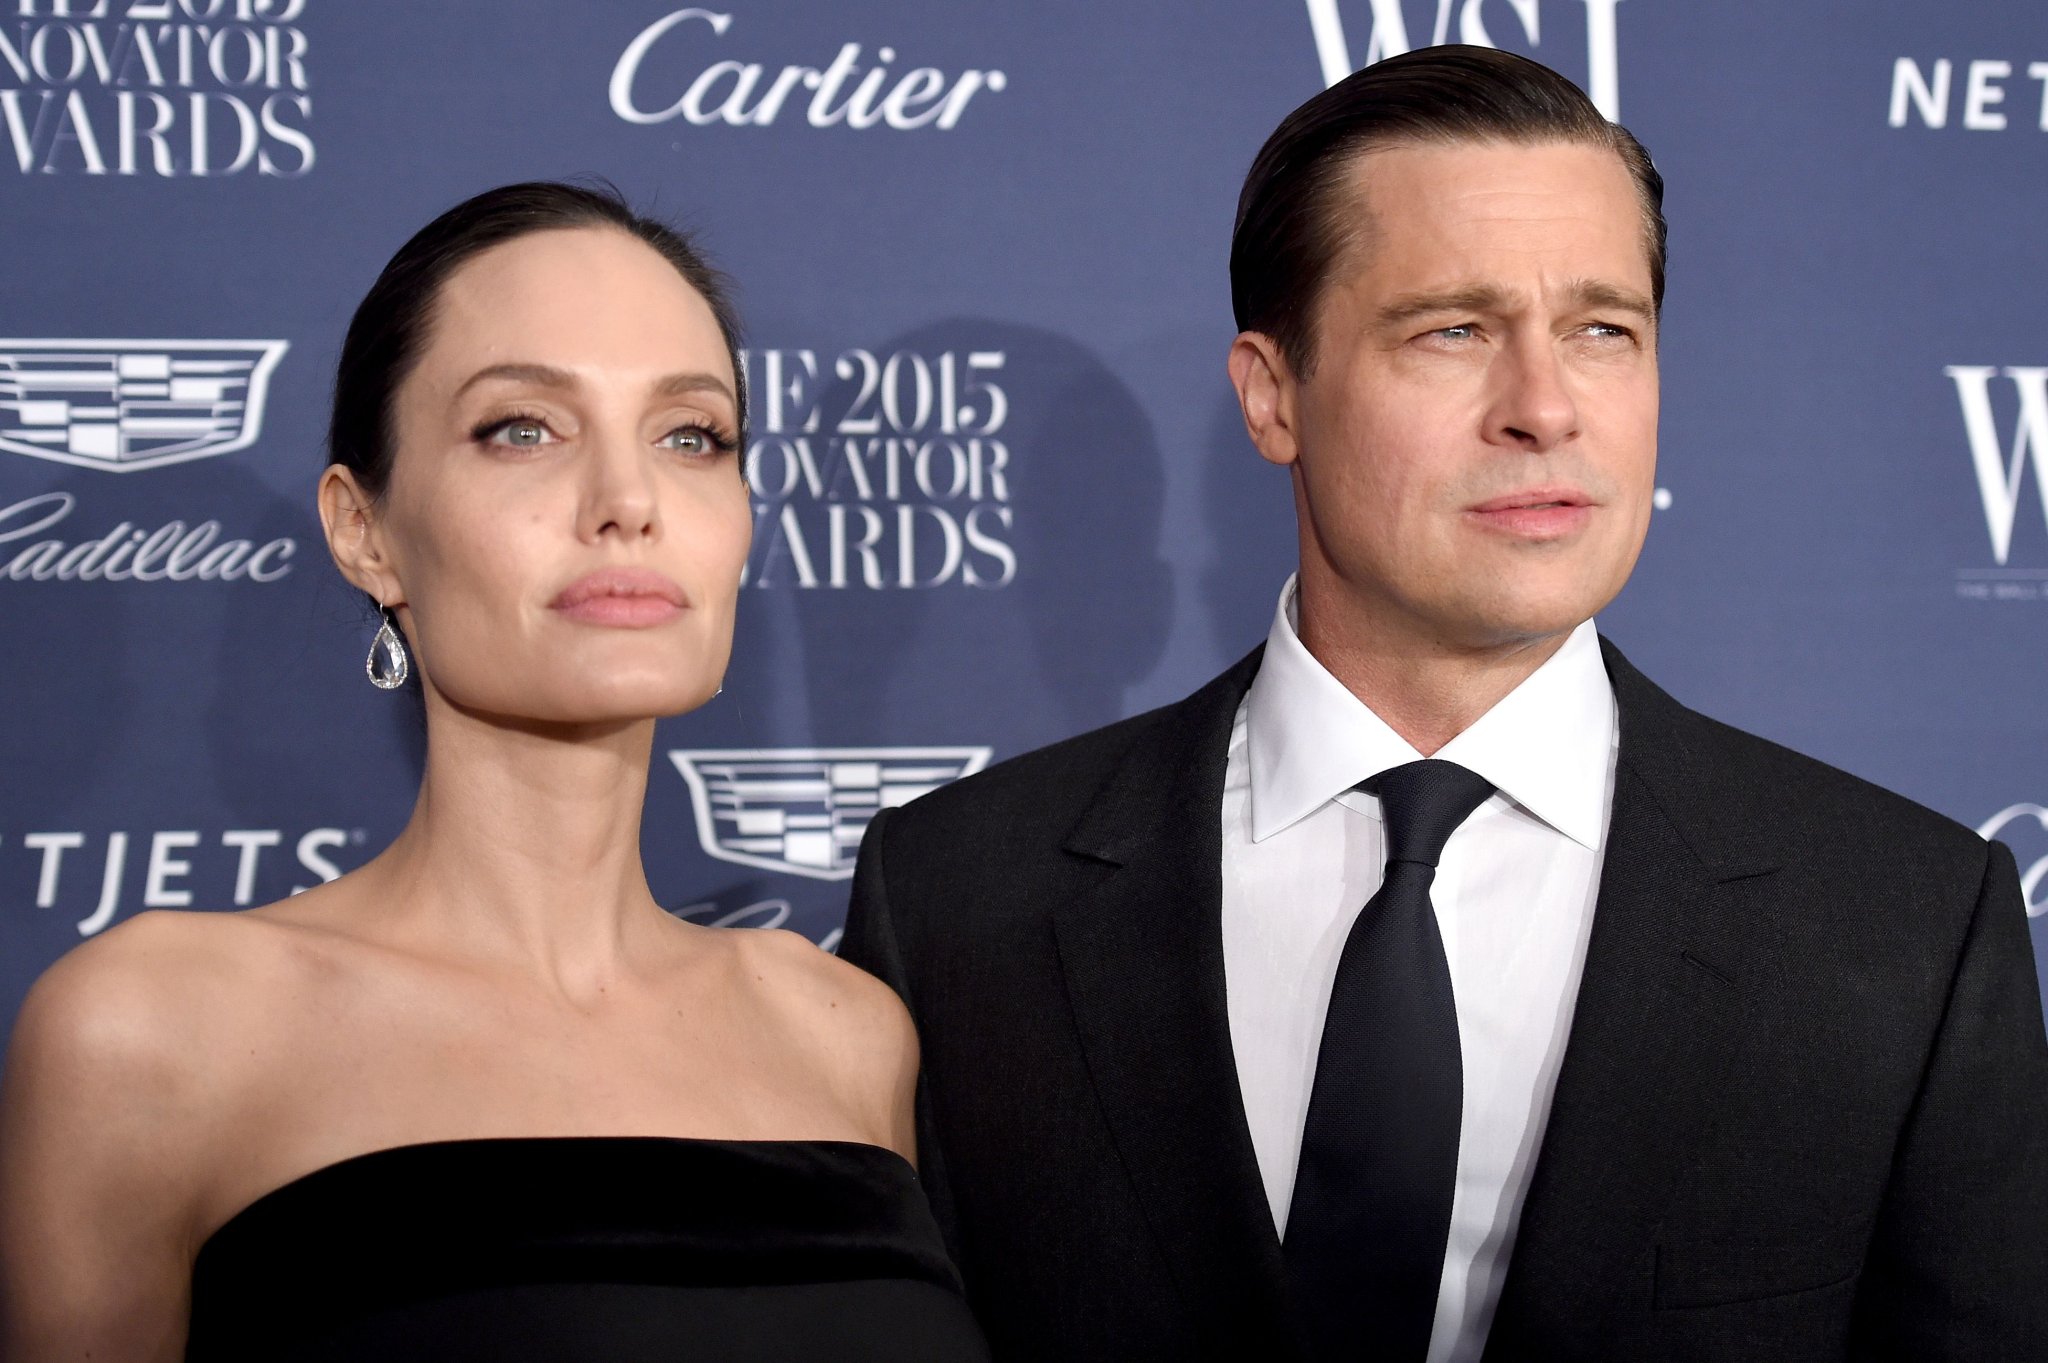 Pulling An Amber? Brad Pitt Accuses Angelina Jolie Of Trying To Ruin His Reputation